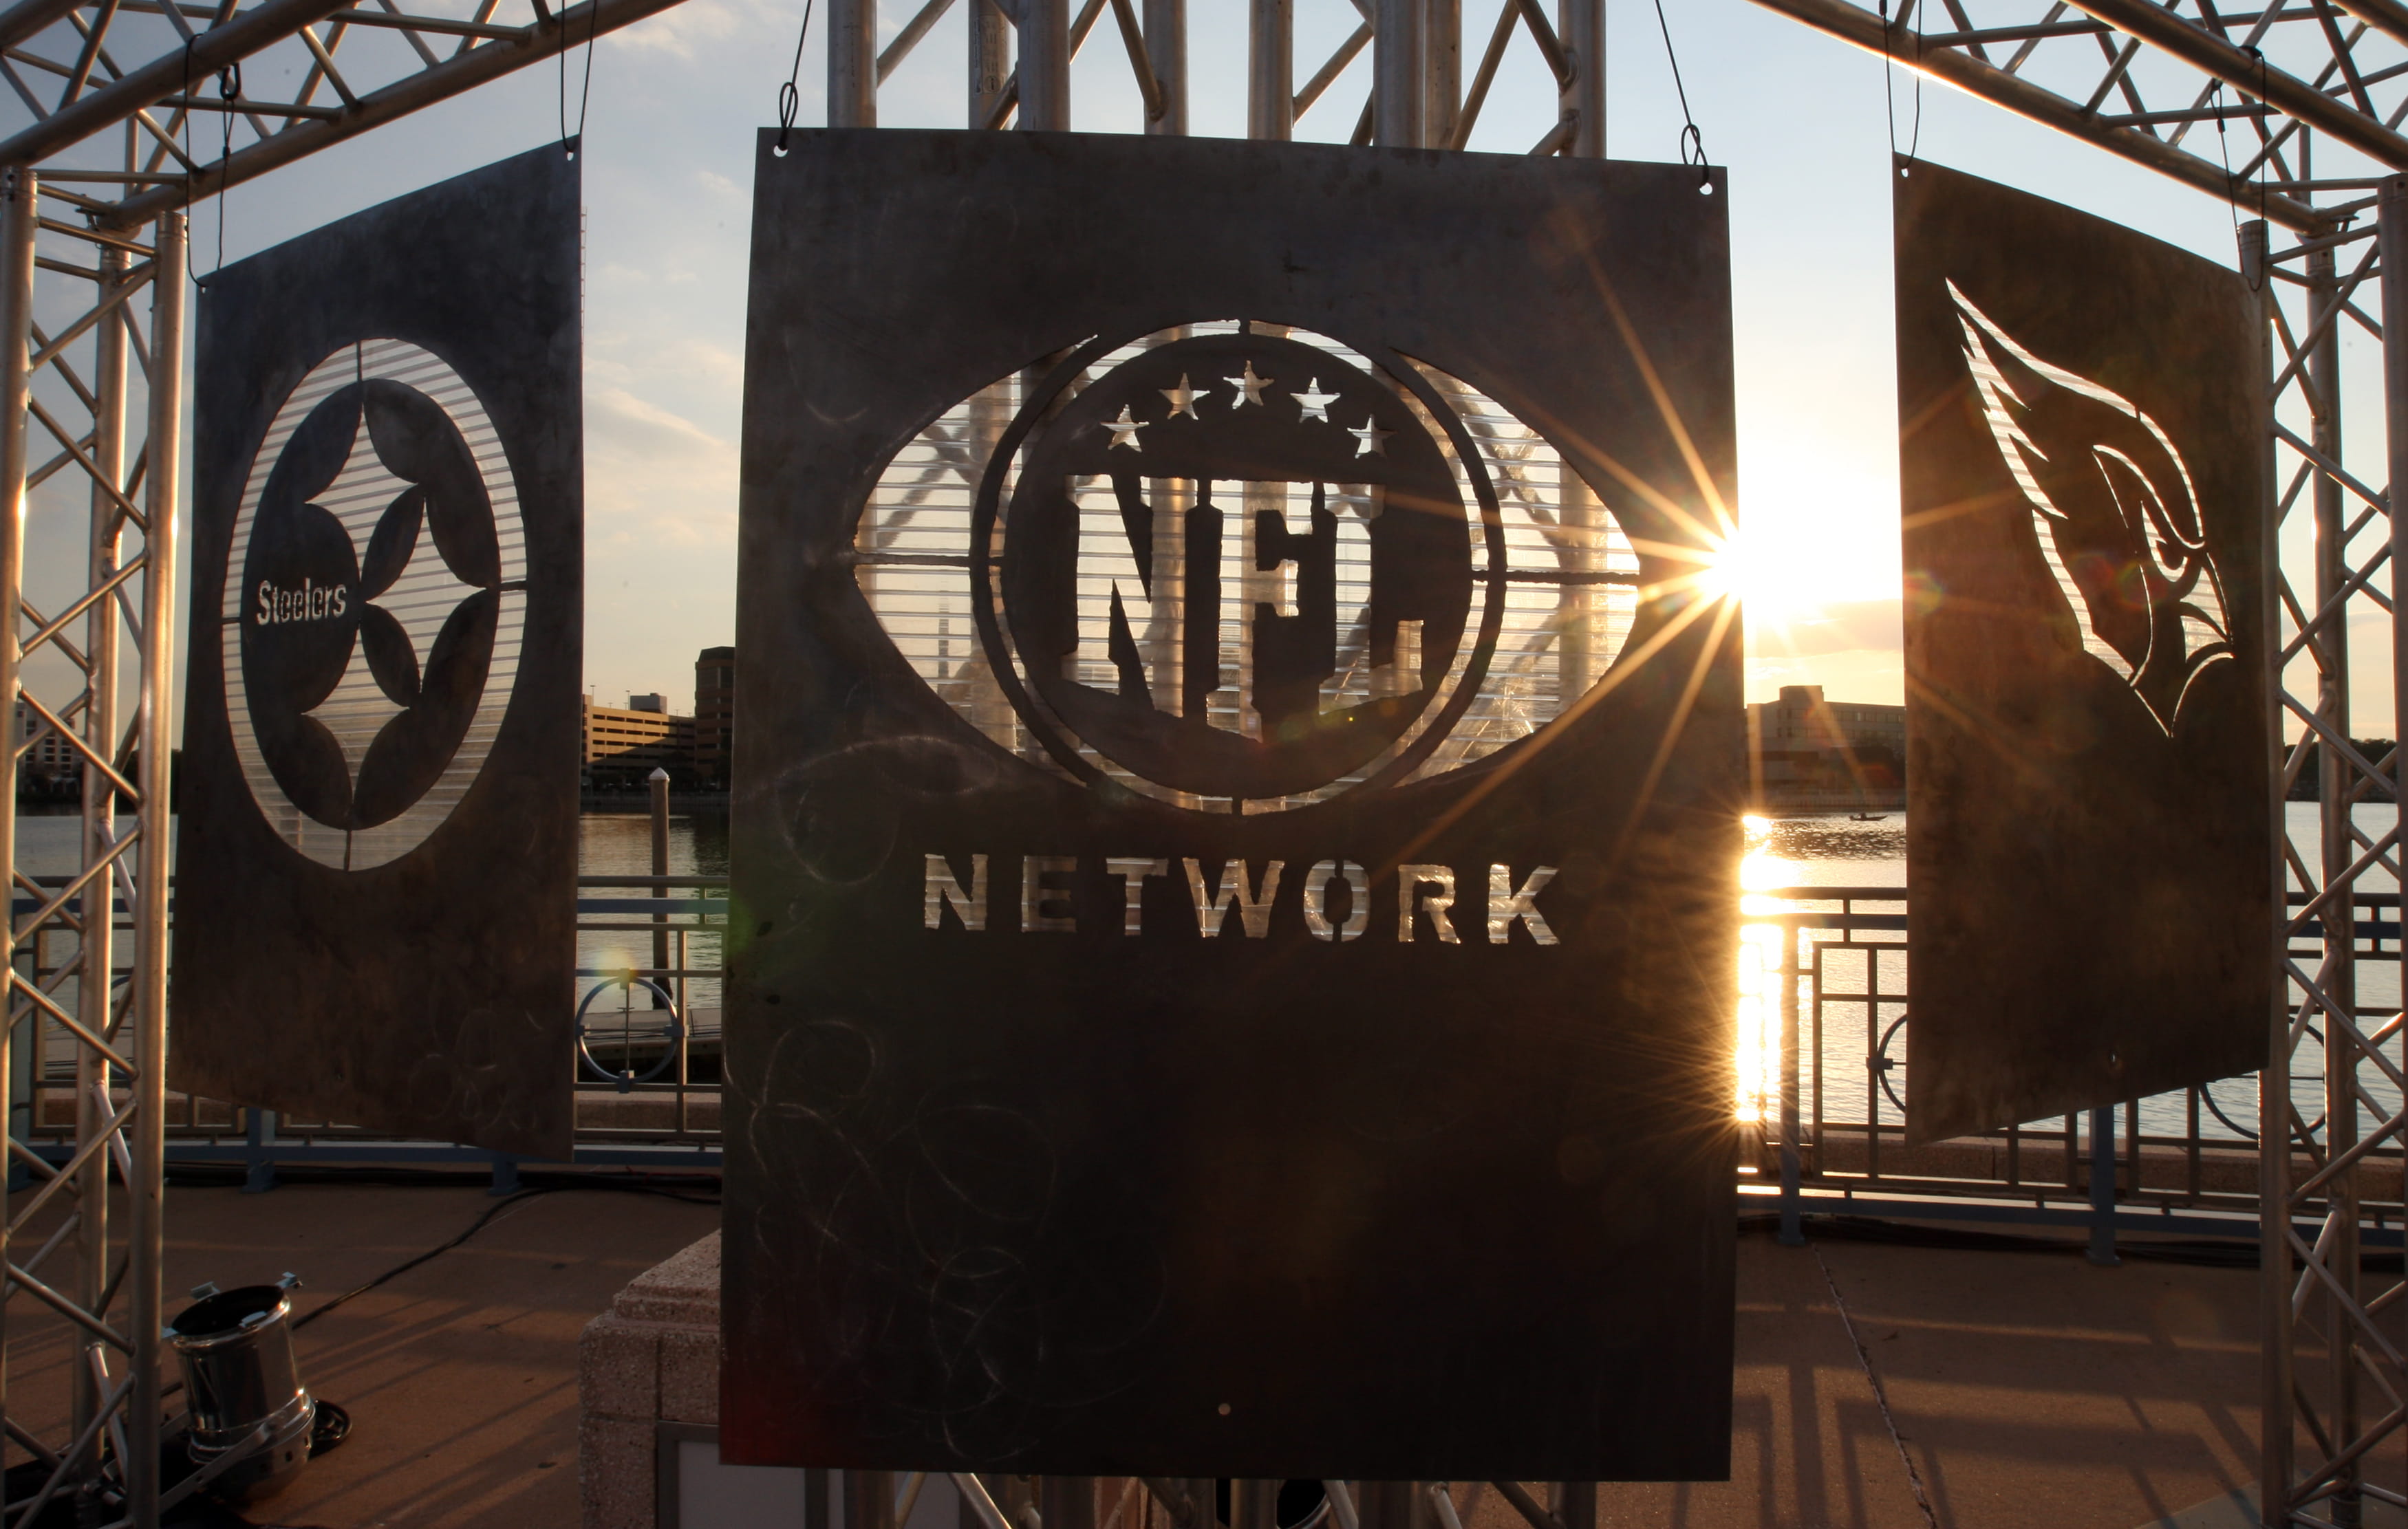 NFL Network was launched in 2003.